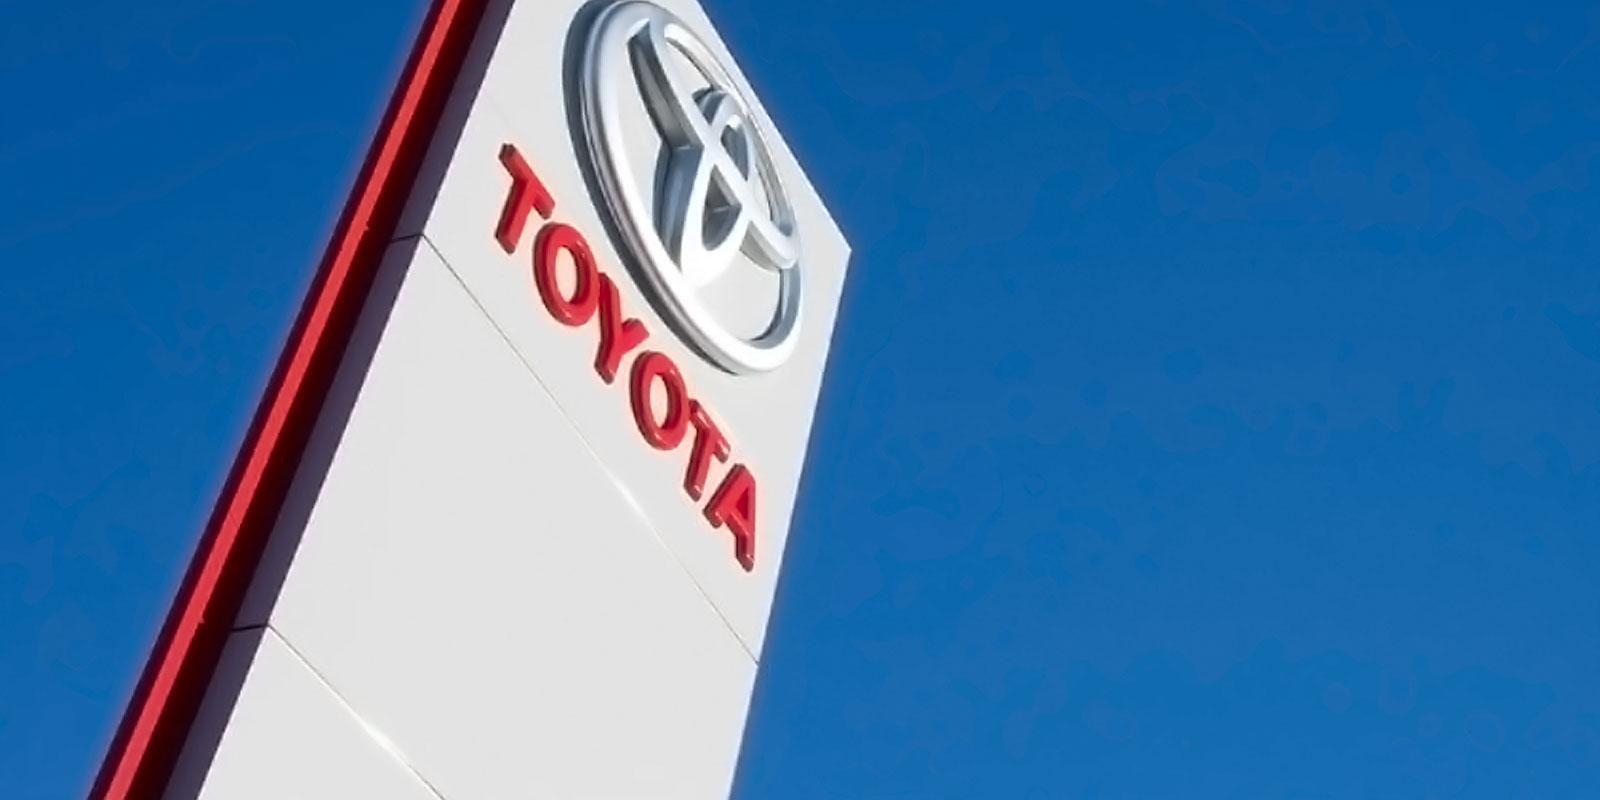 Toyota Recalls 2.4M Cars Over Stall Fault